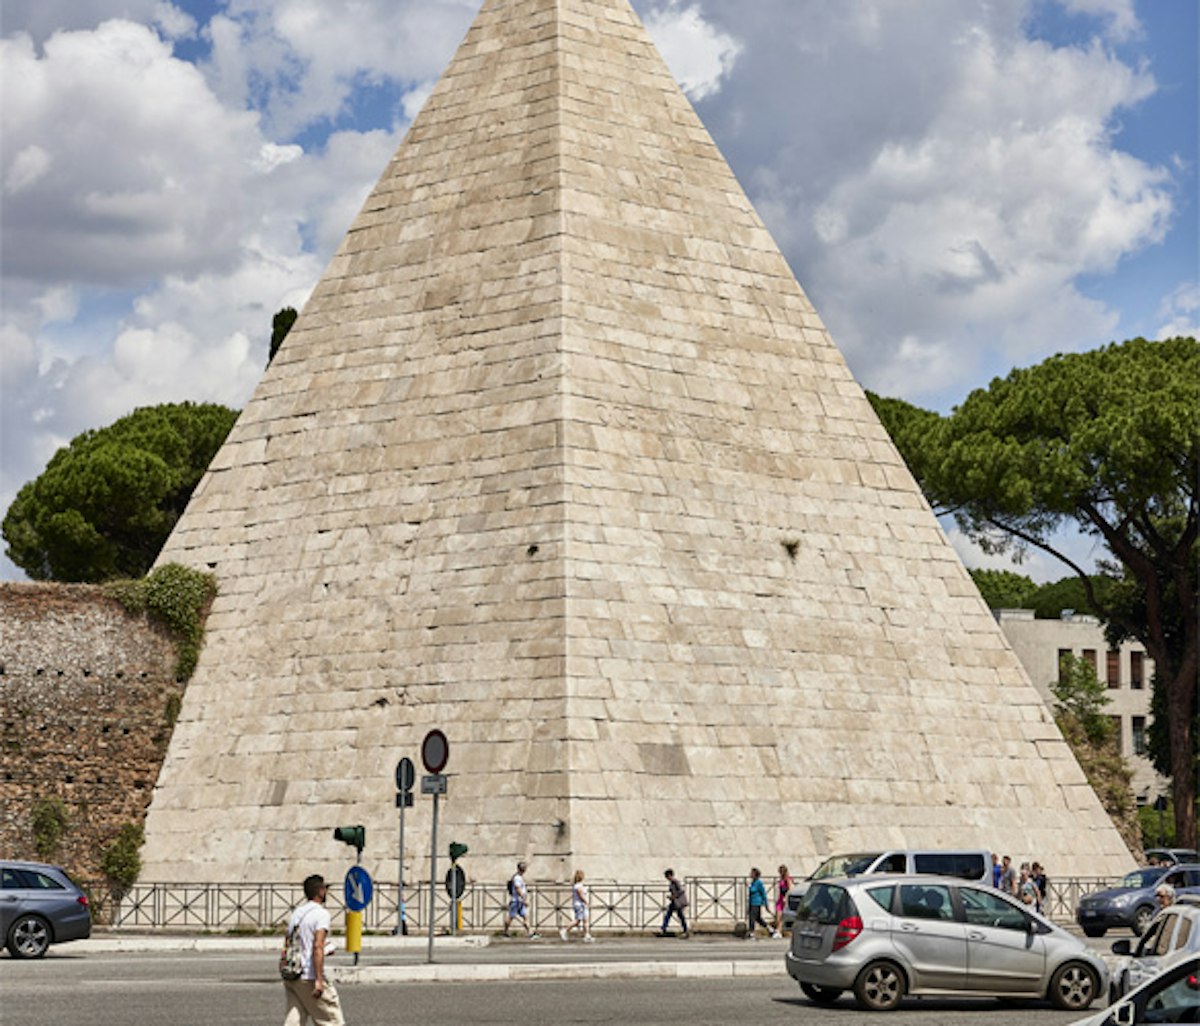 A large pyramid in the middle of a street.